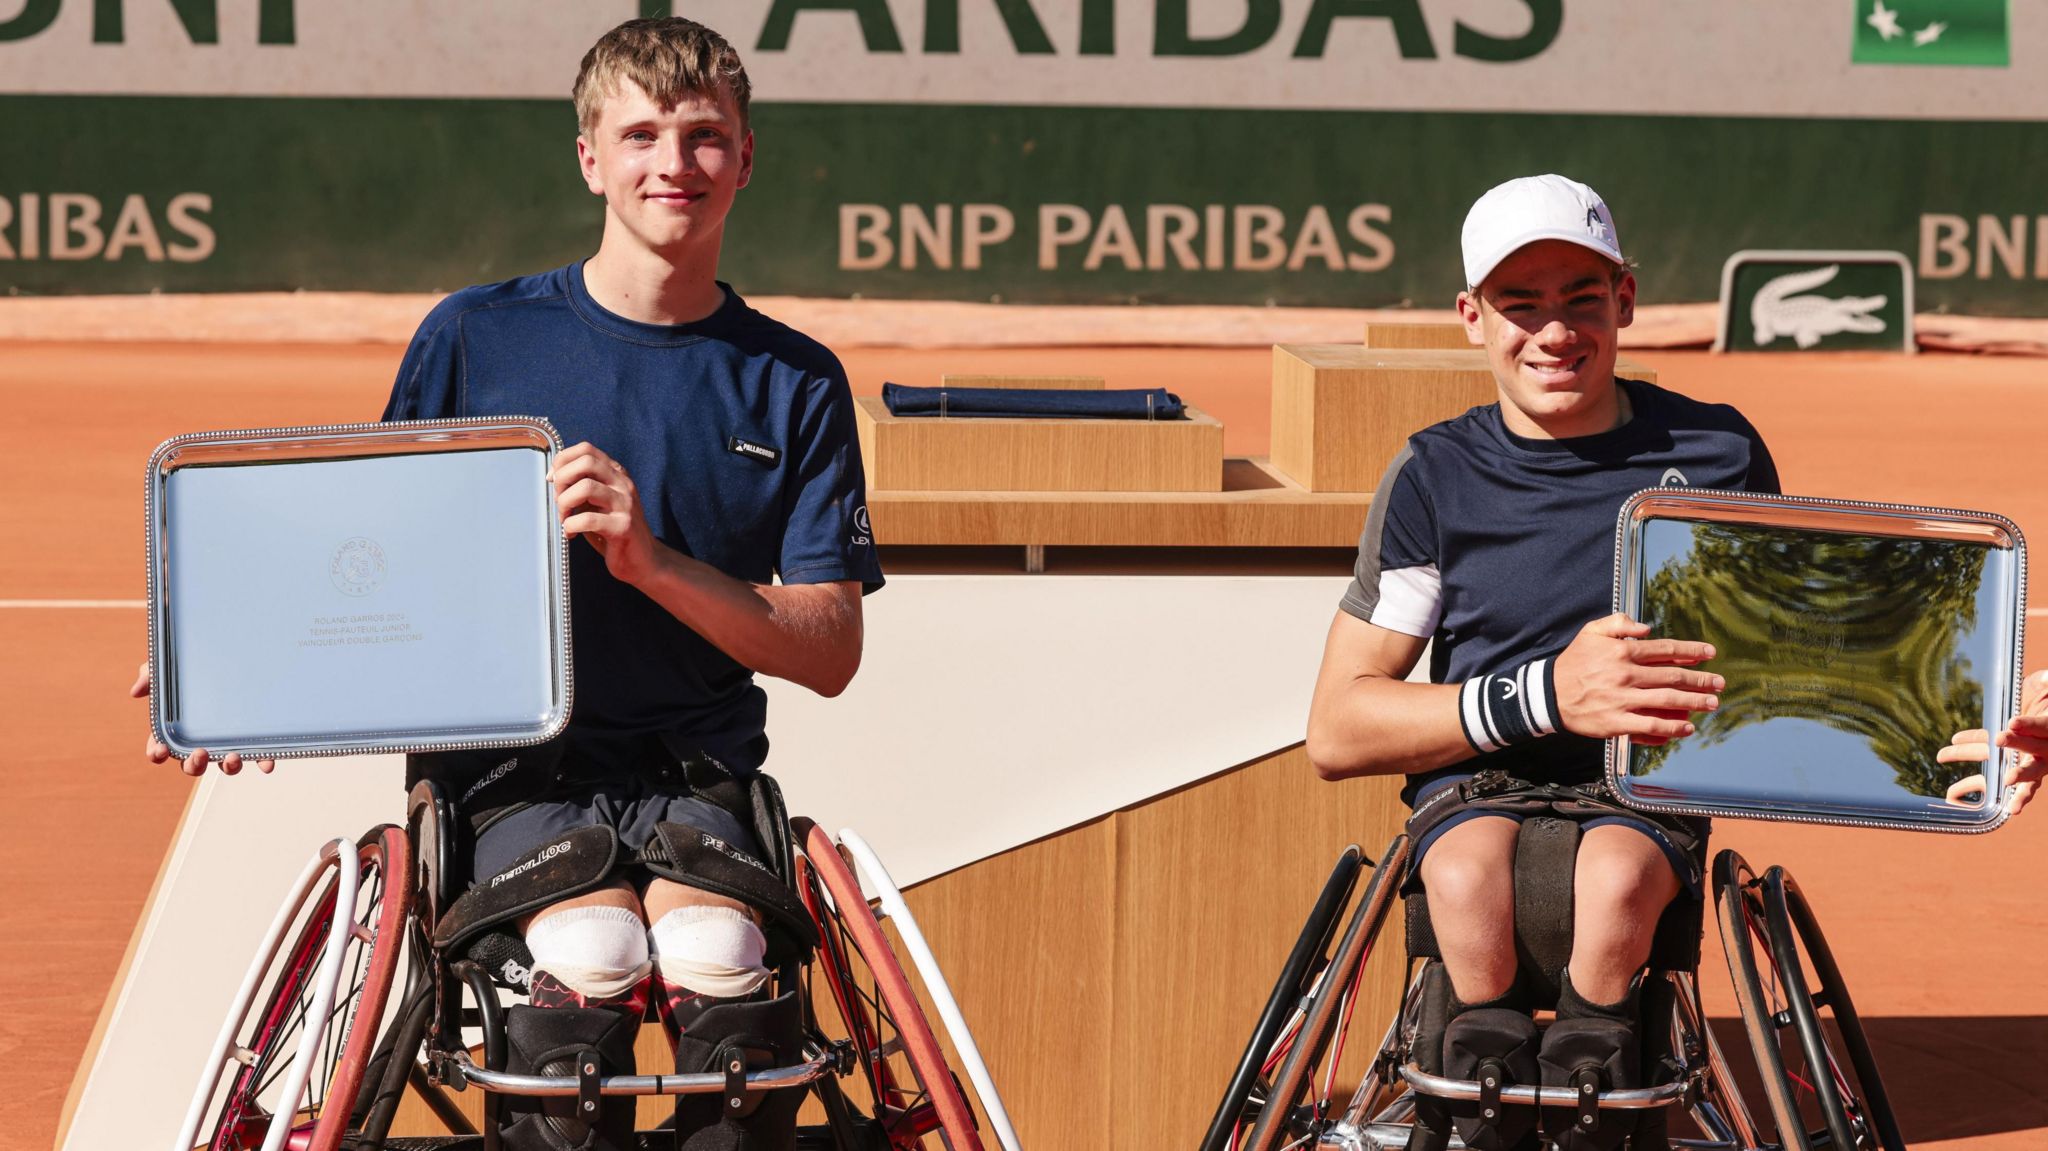 Ruben and his tennis doubles partner in their wheelchairs